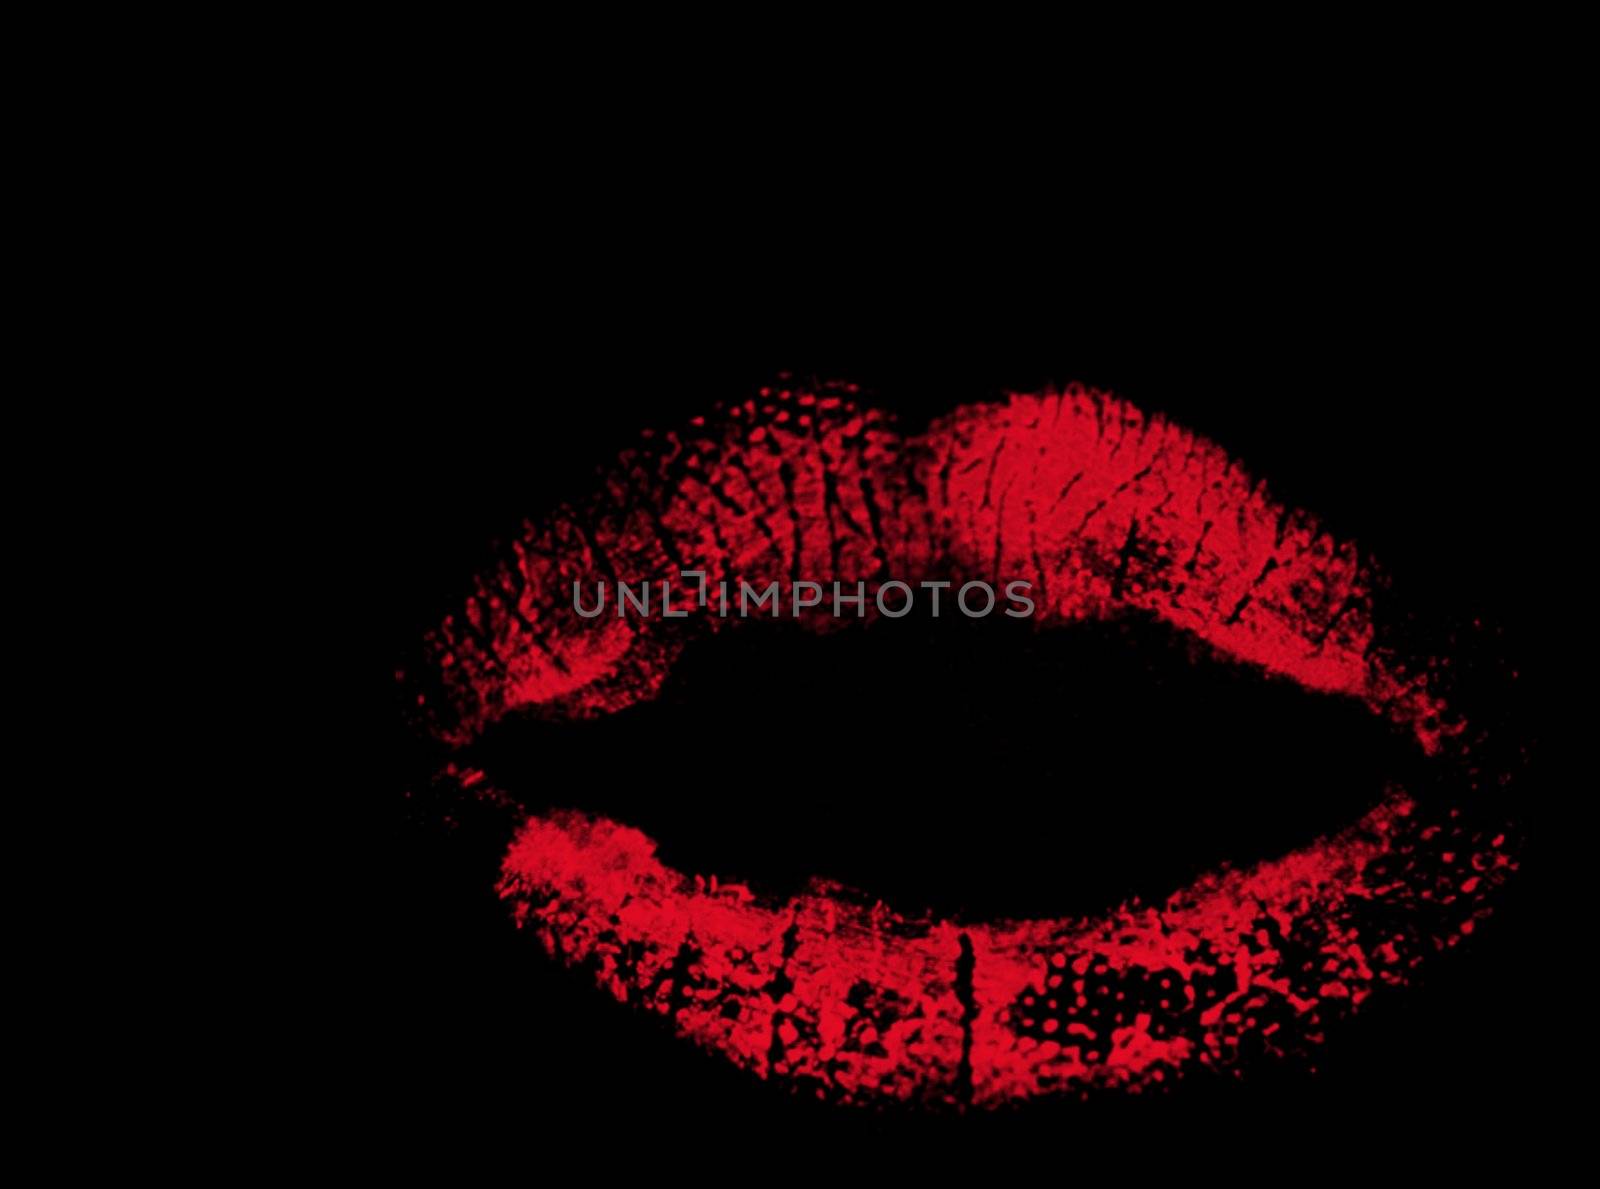 Illustration - Lips on blank background, ideal for romance related designs